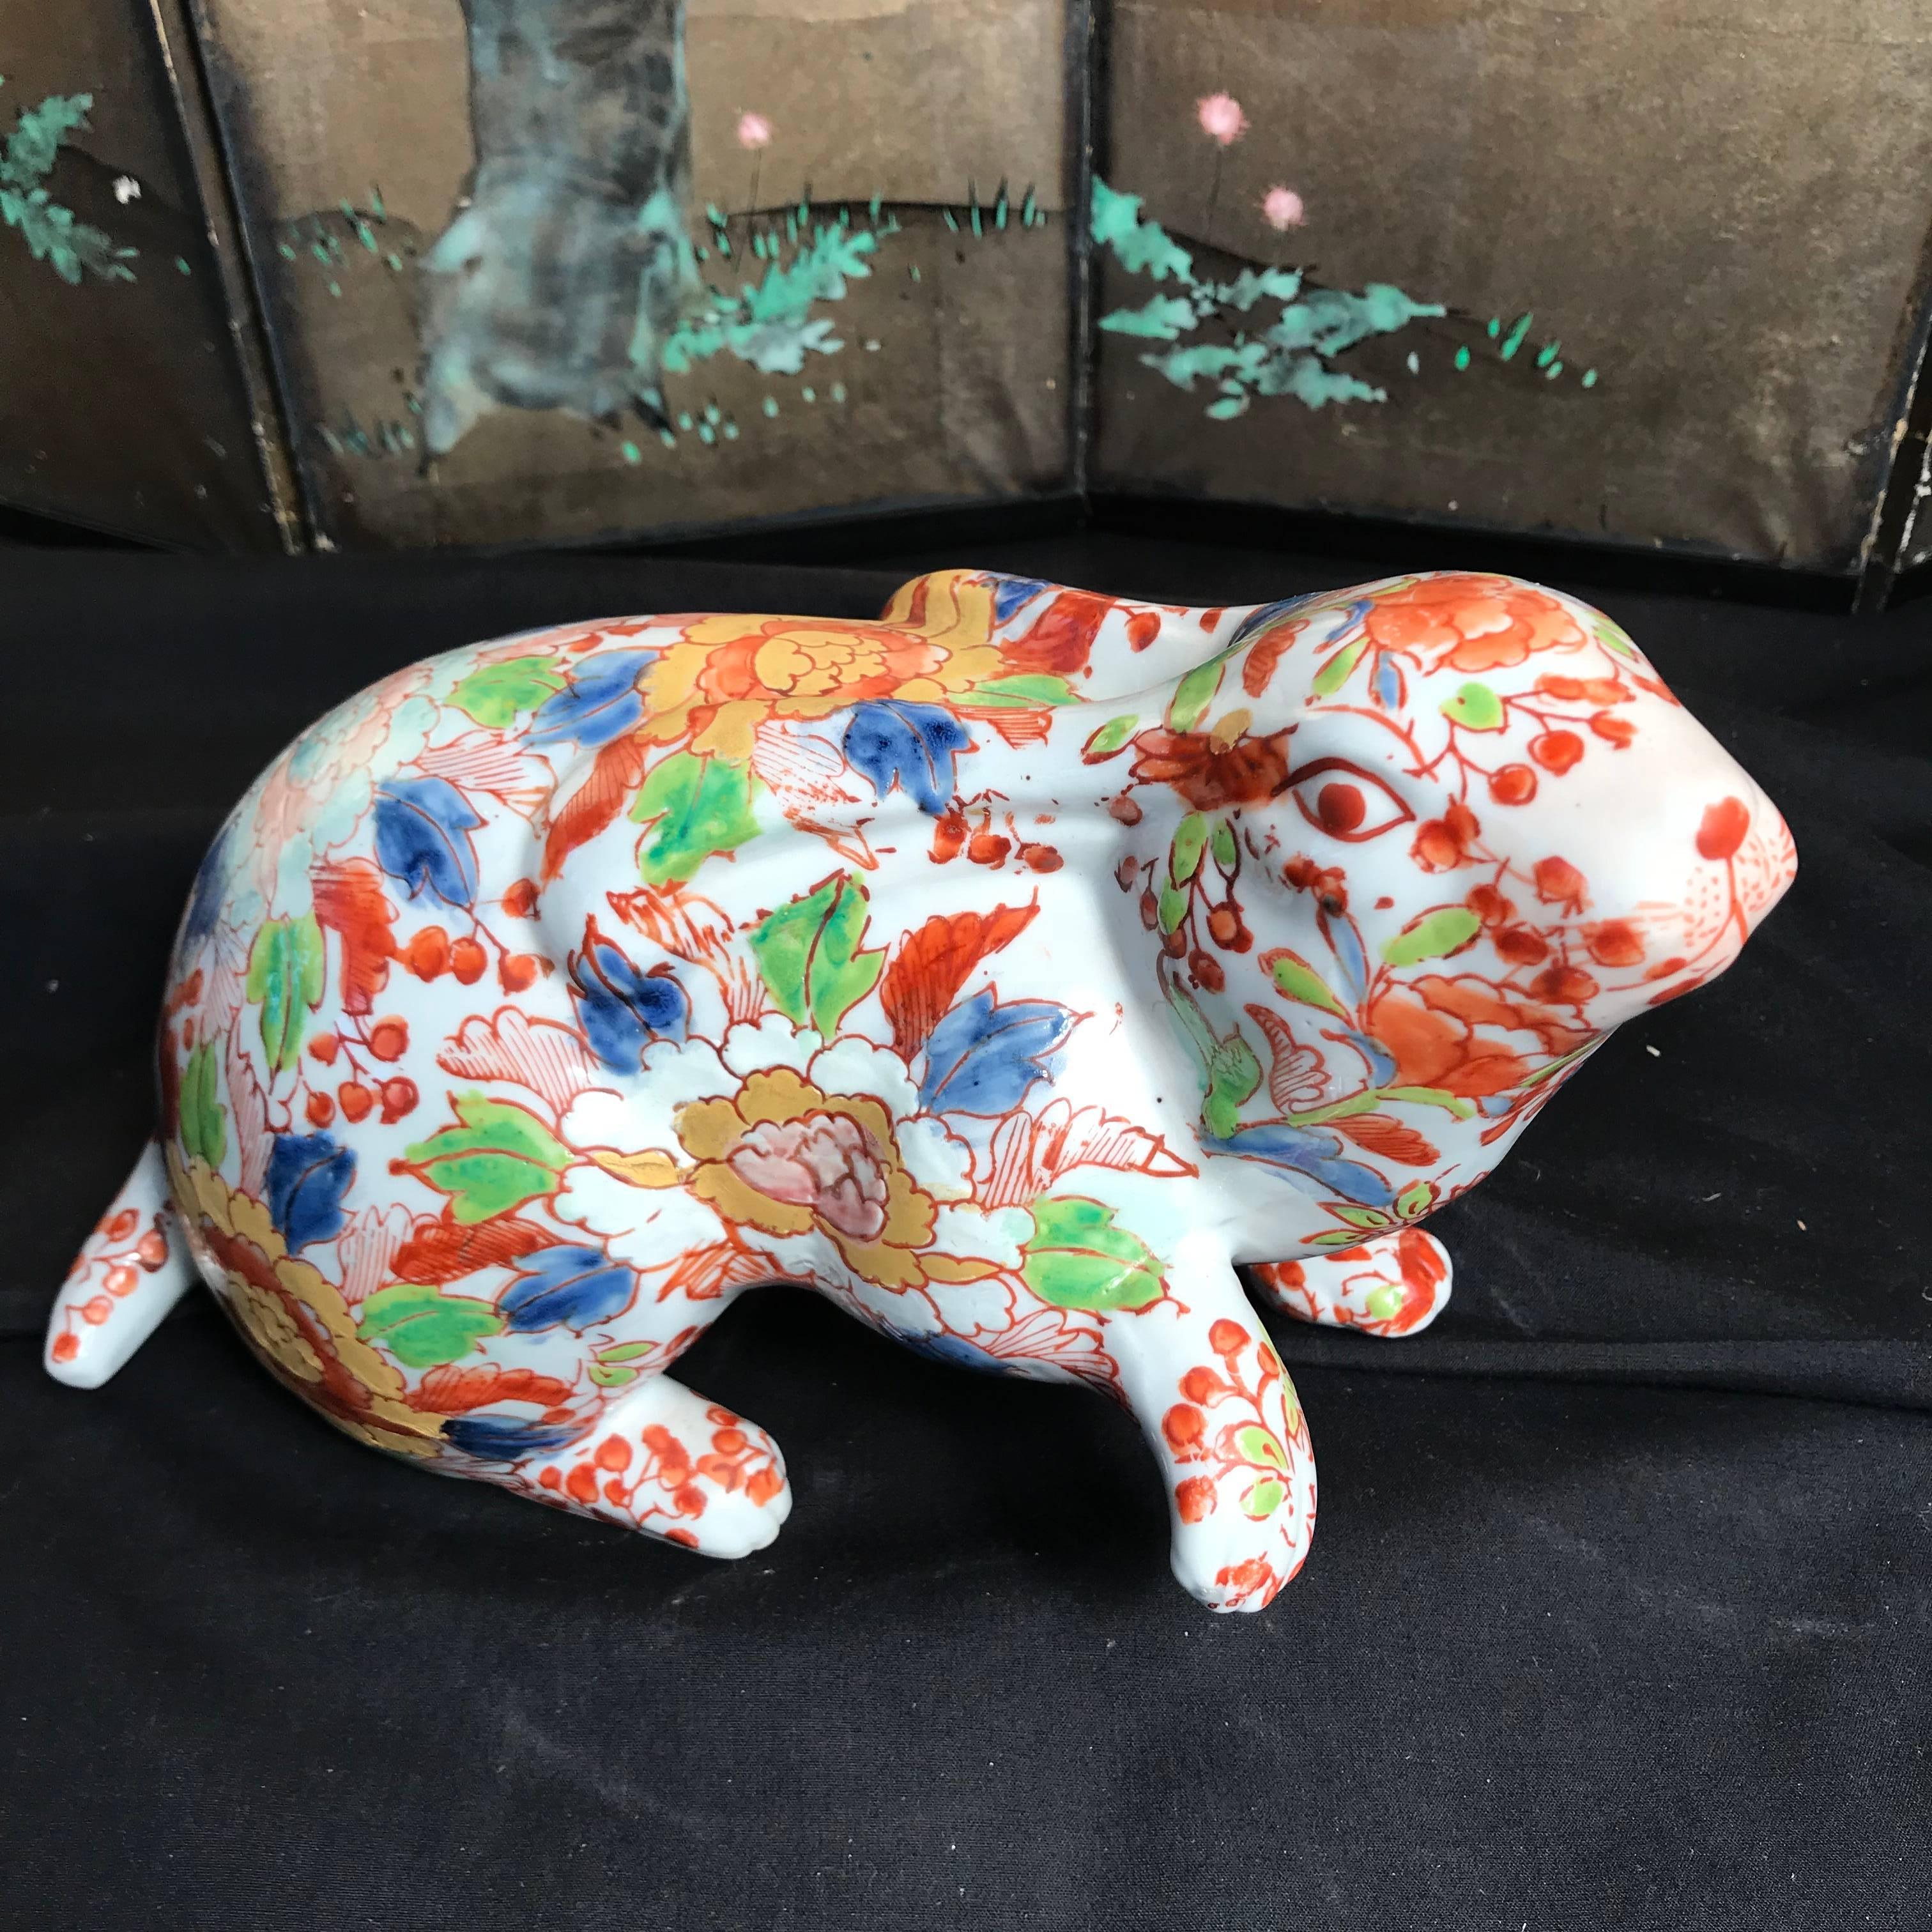 Japanese big red enameled porcelain scampering rabbit sculpture okimono signed base, 90 years old.

Maker: Imari red enamels over blue, yellow and green under glazing

Dimensions: 5.5 inches tall and 9 inches length

Hand